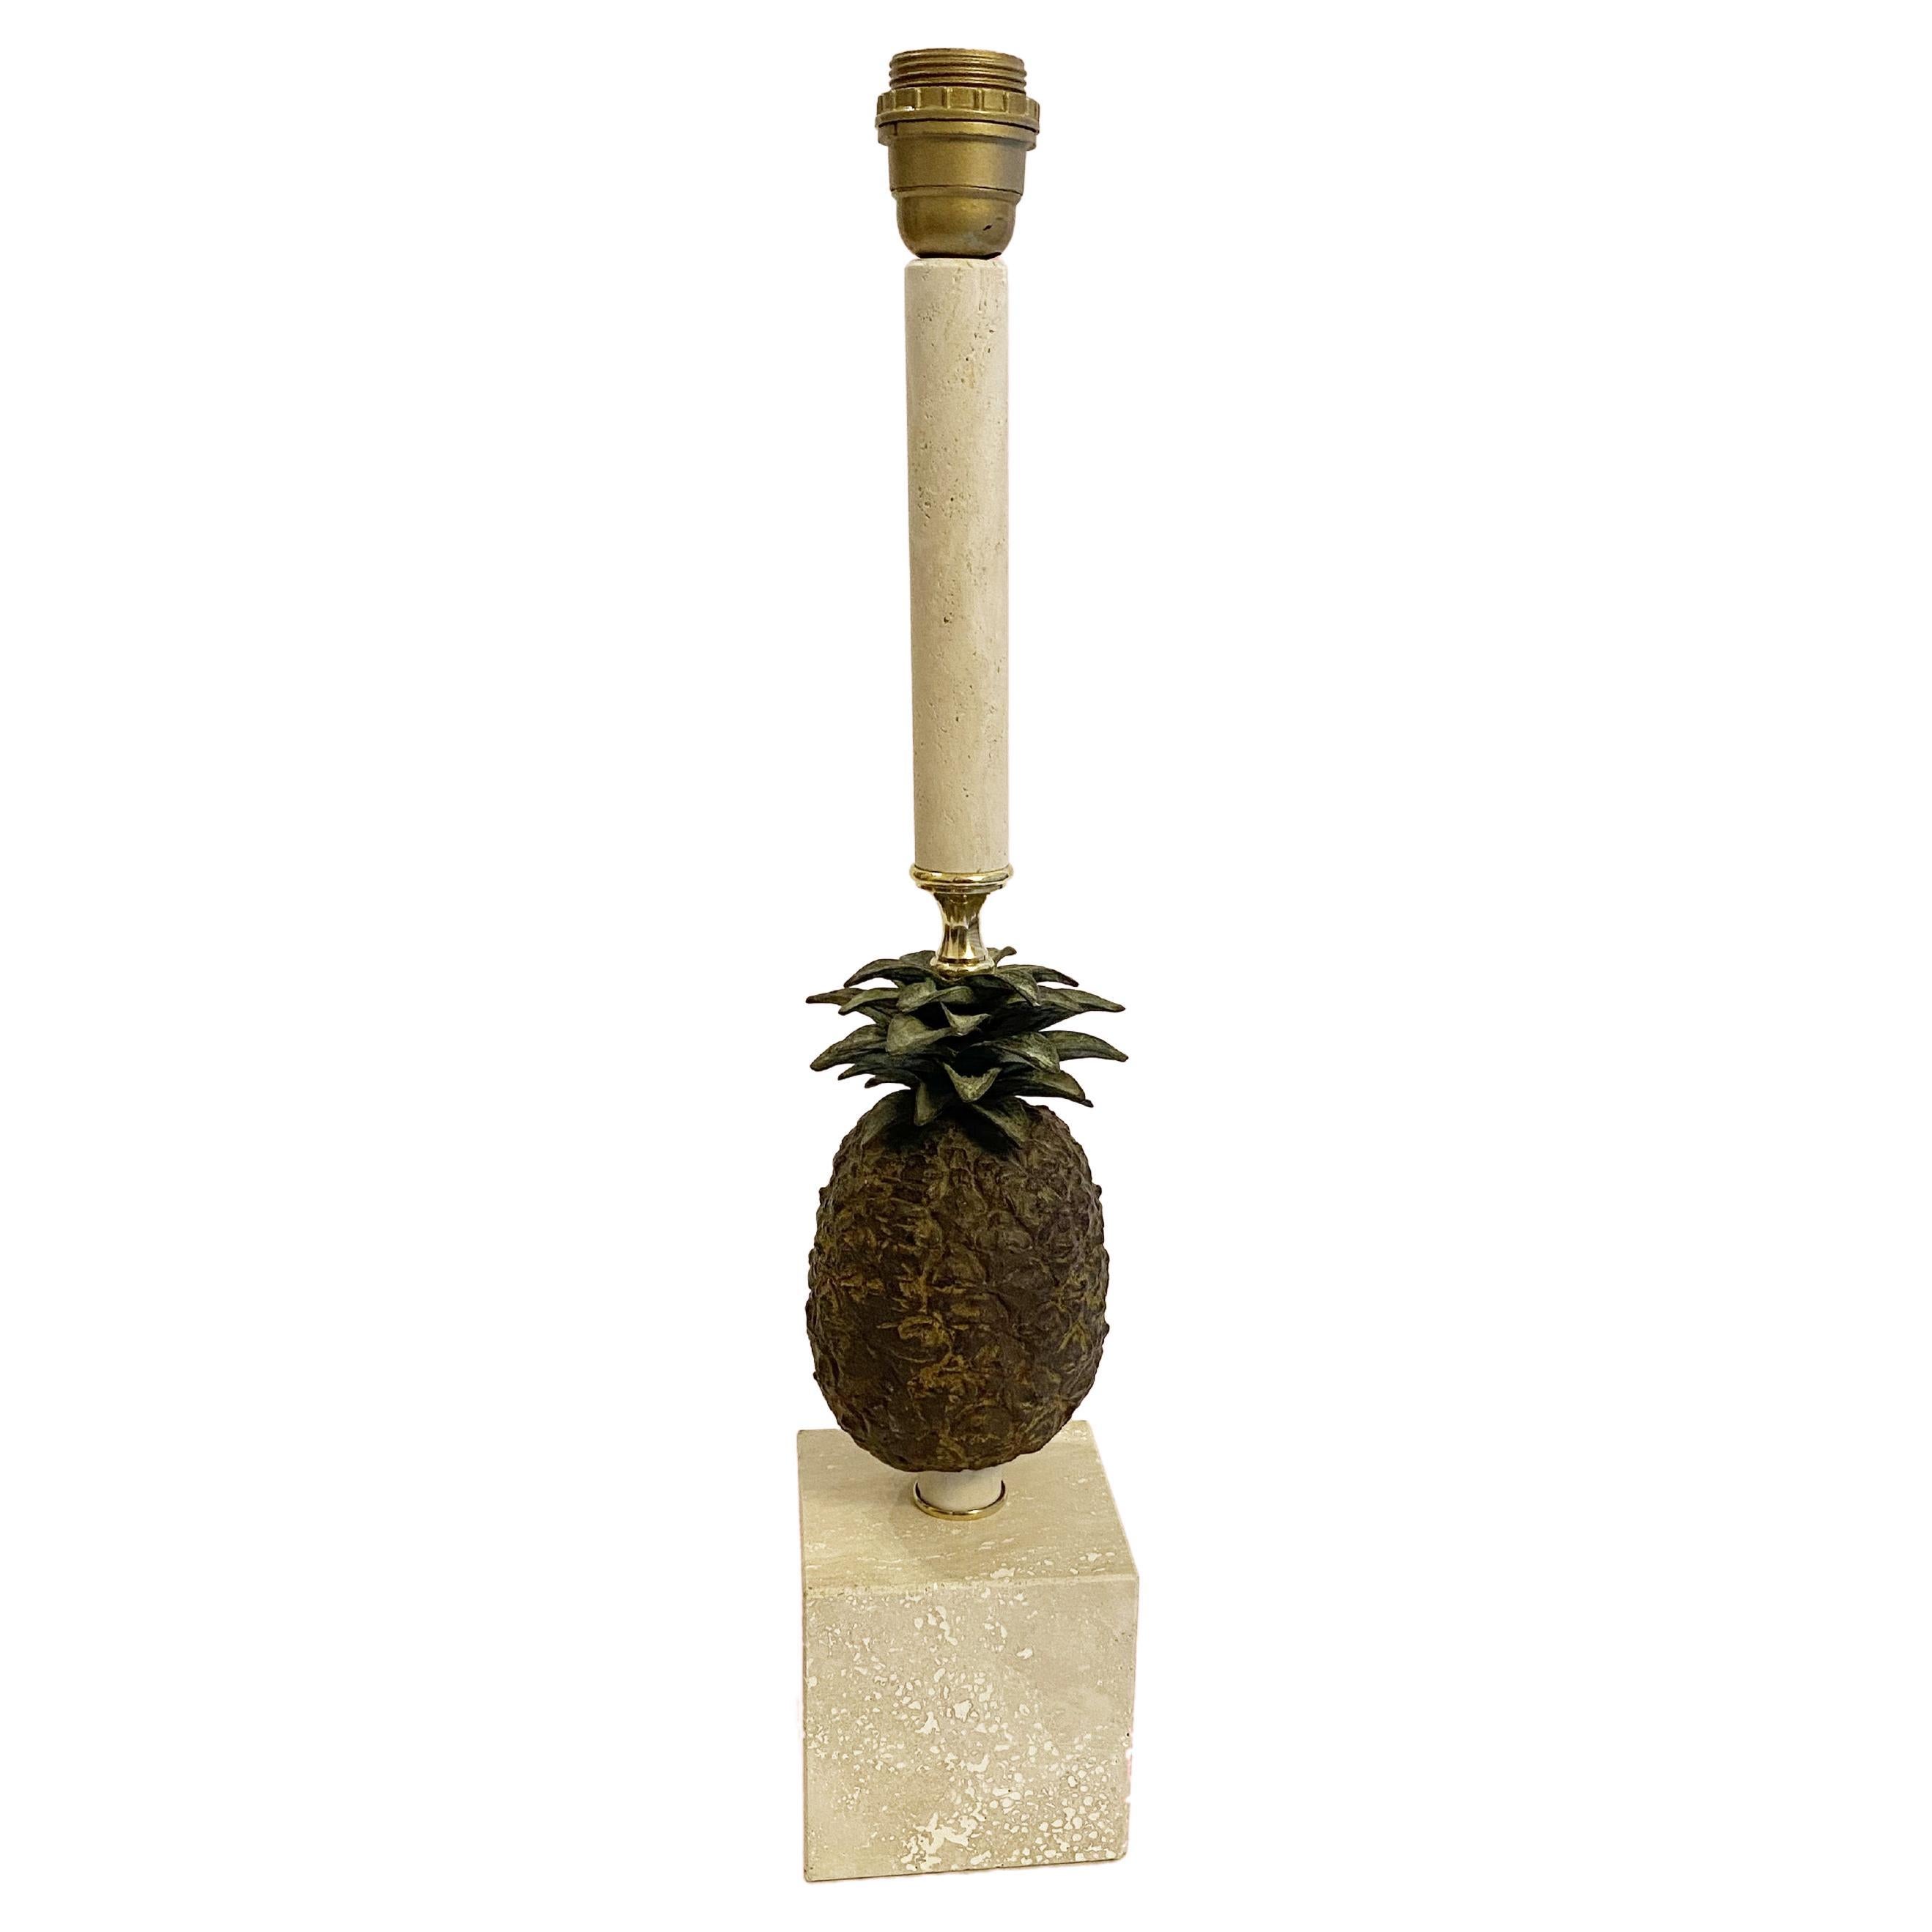 Hollywood Regency Pineapple Table Lamp in Patined Bronze and Travertine, 1970s For Sale